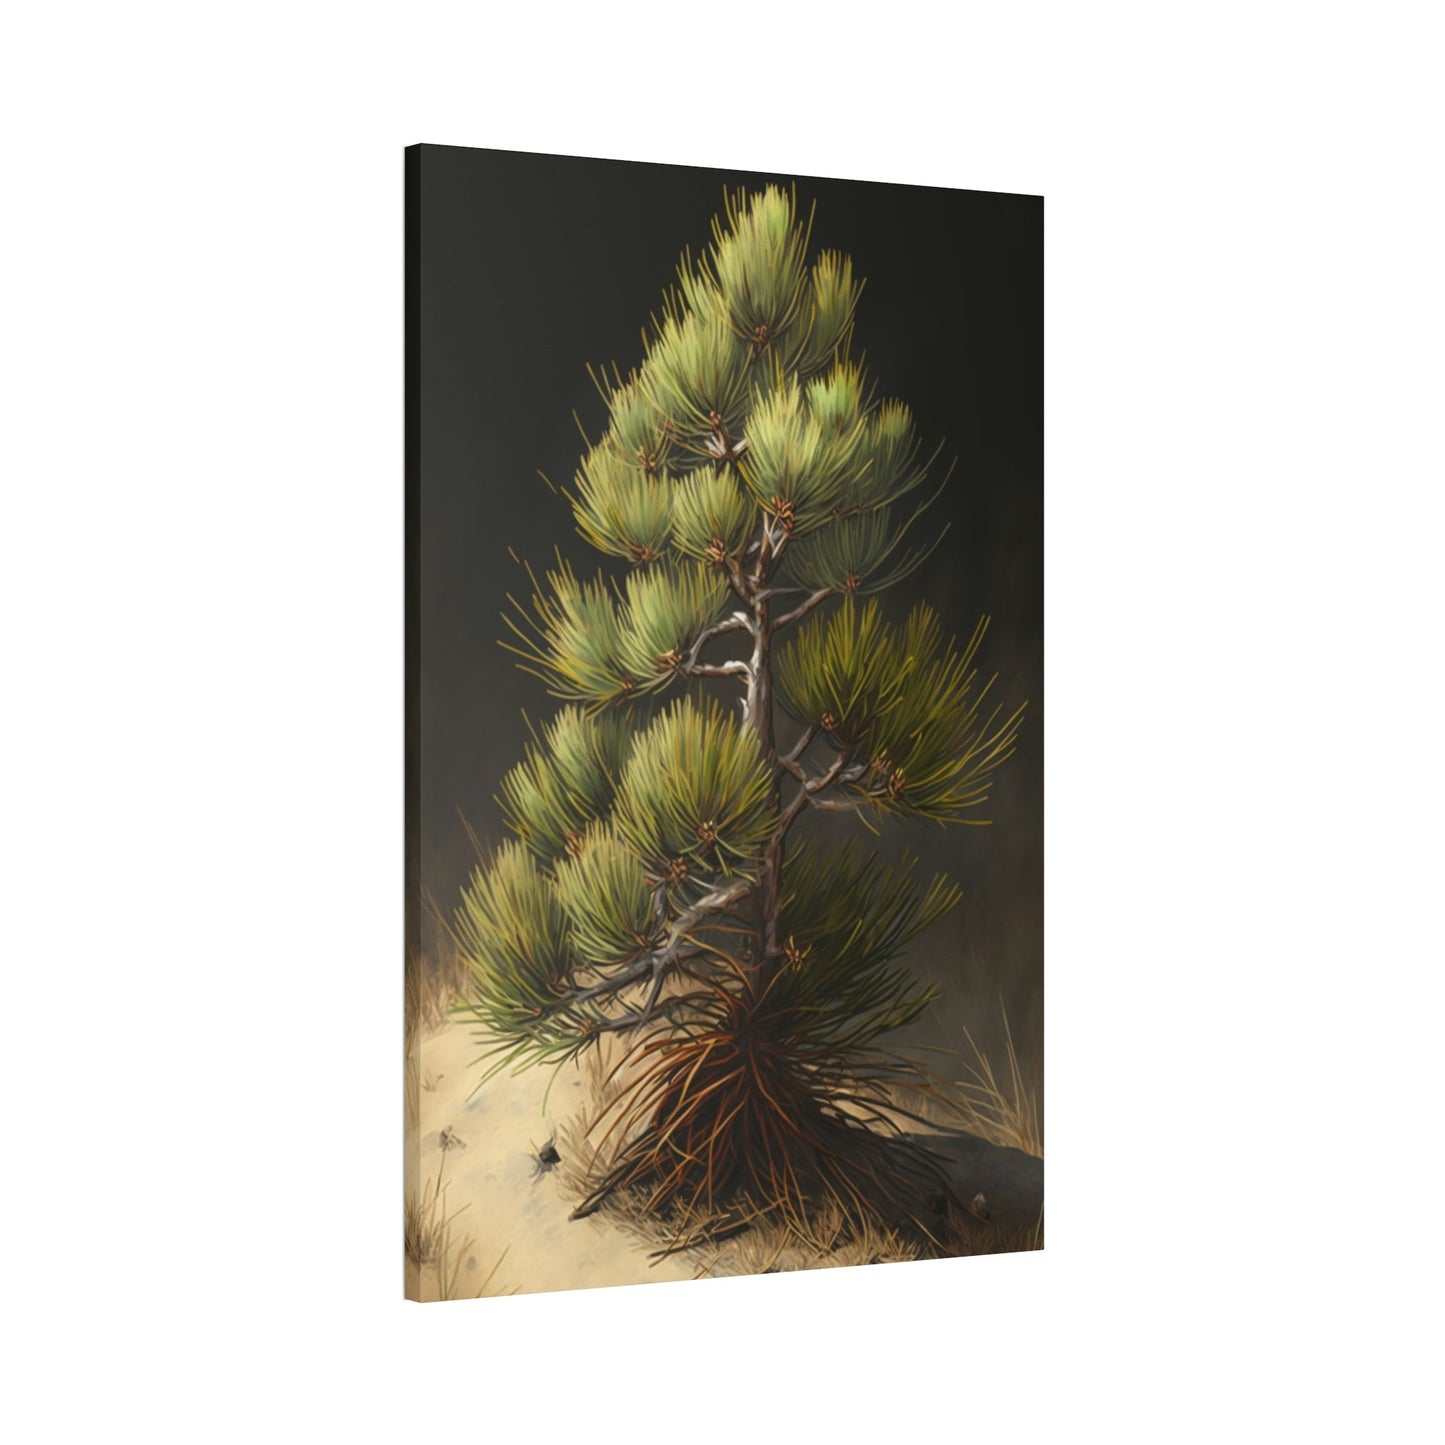 Pine Tree Utopia: A Canvas of Fantasy Worlds and Imagination Unleashed